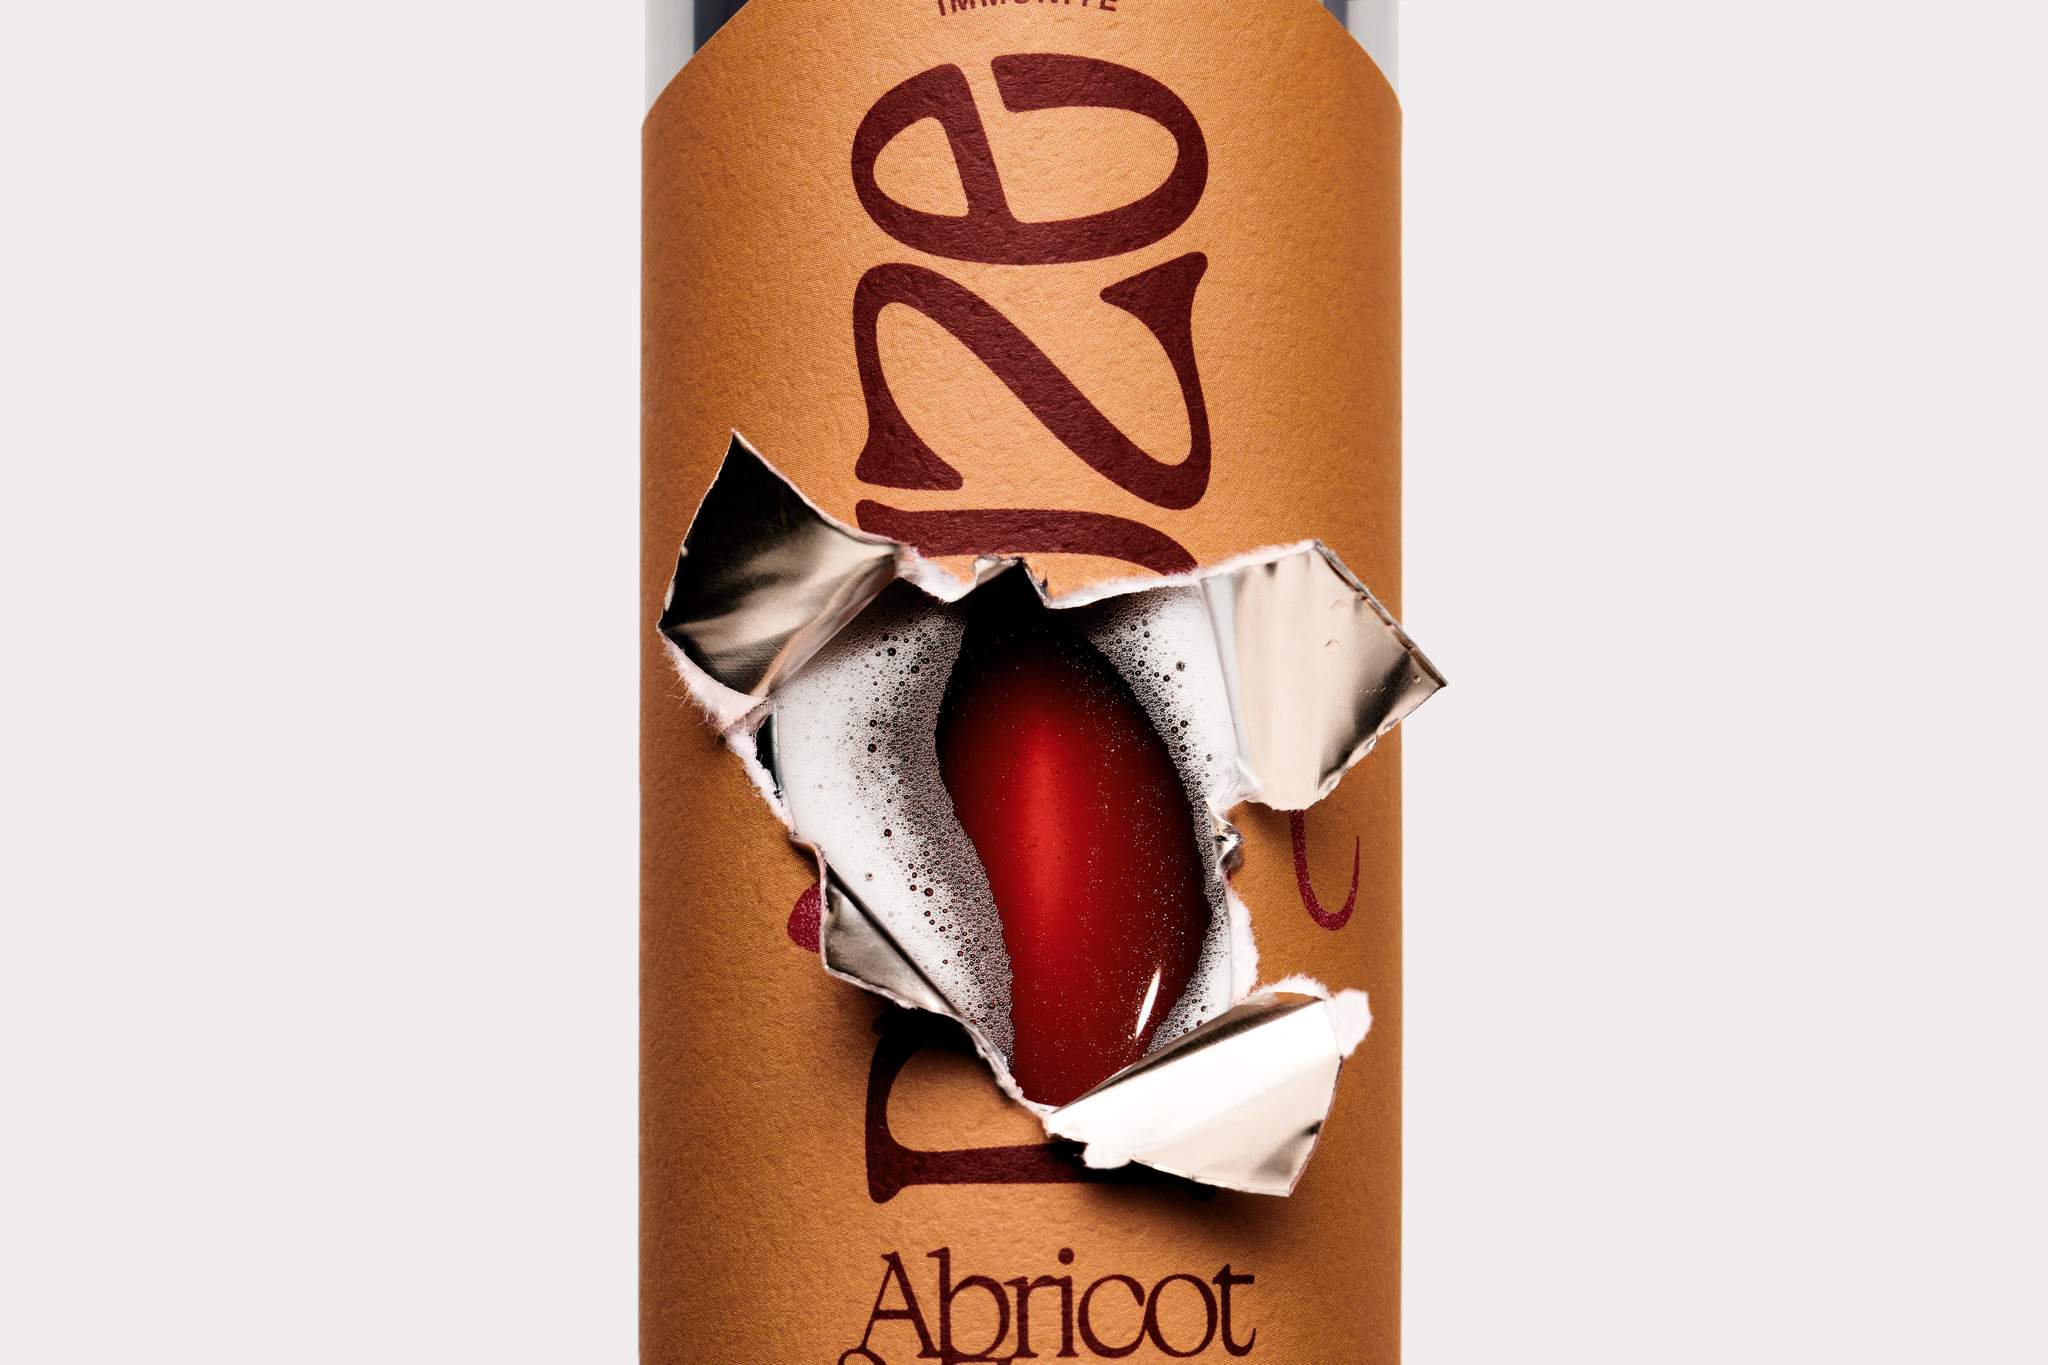 Closeup of a torn and ripped Apricot & Za'atar can label revealing a foamy and sparkling red beverage inside.